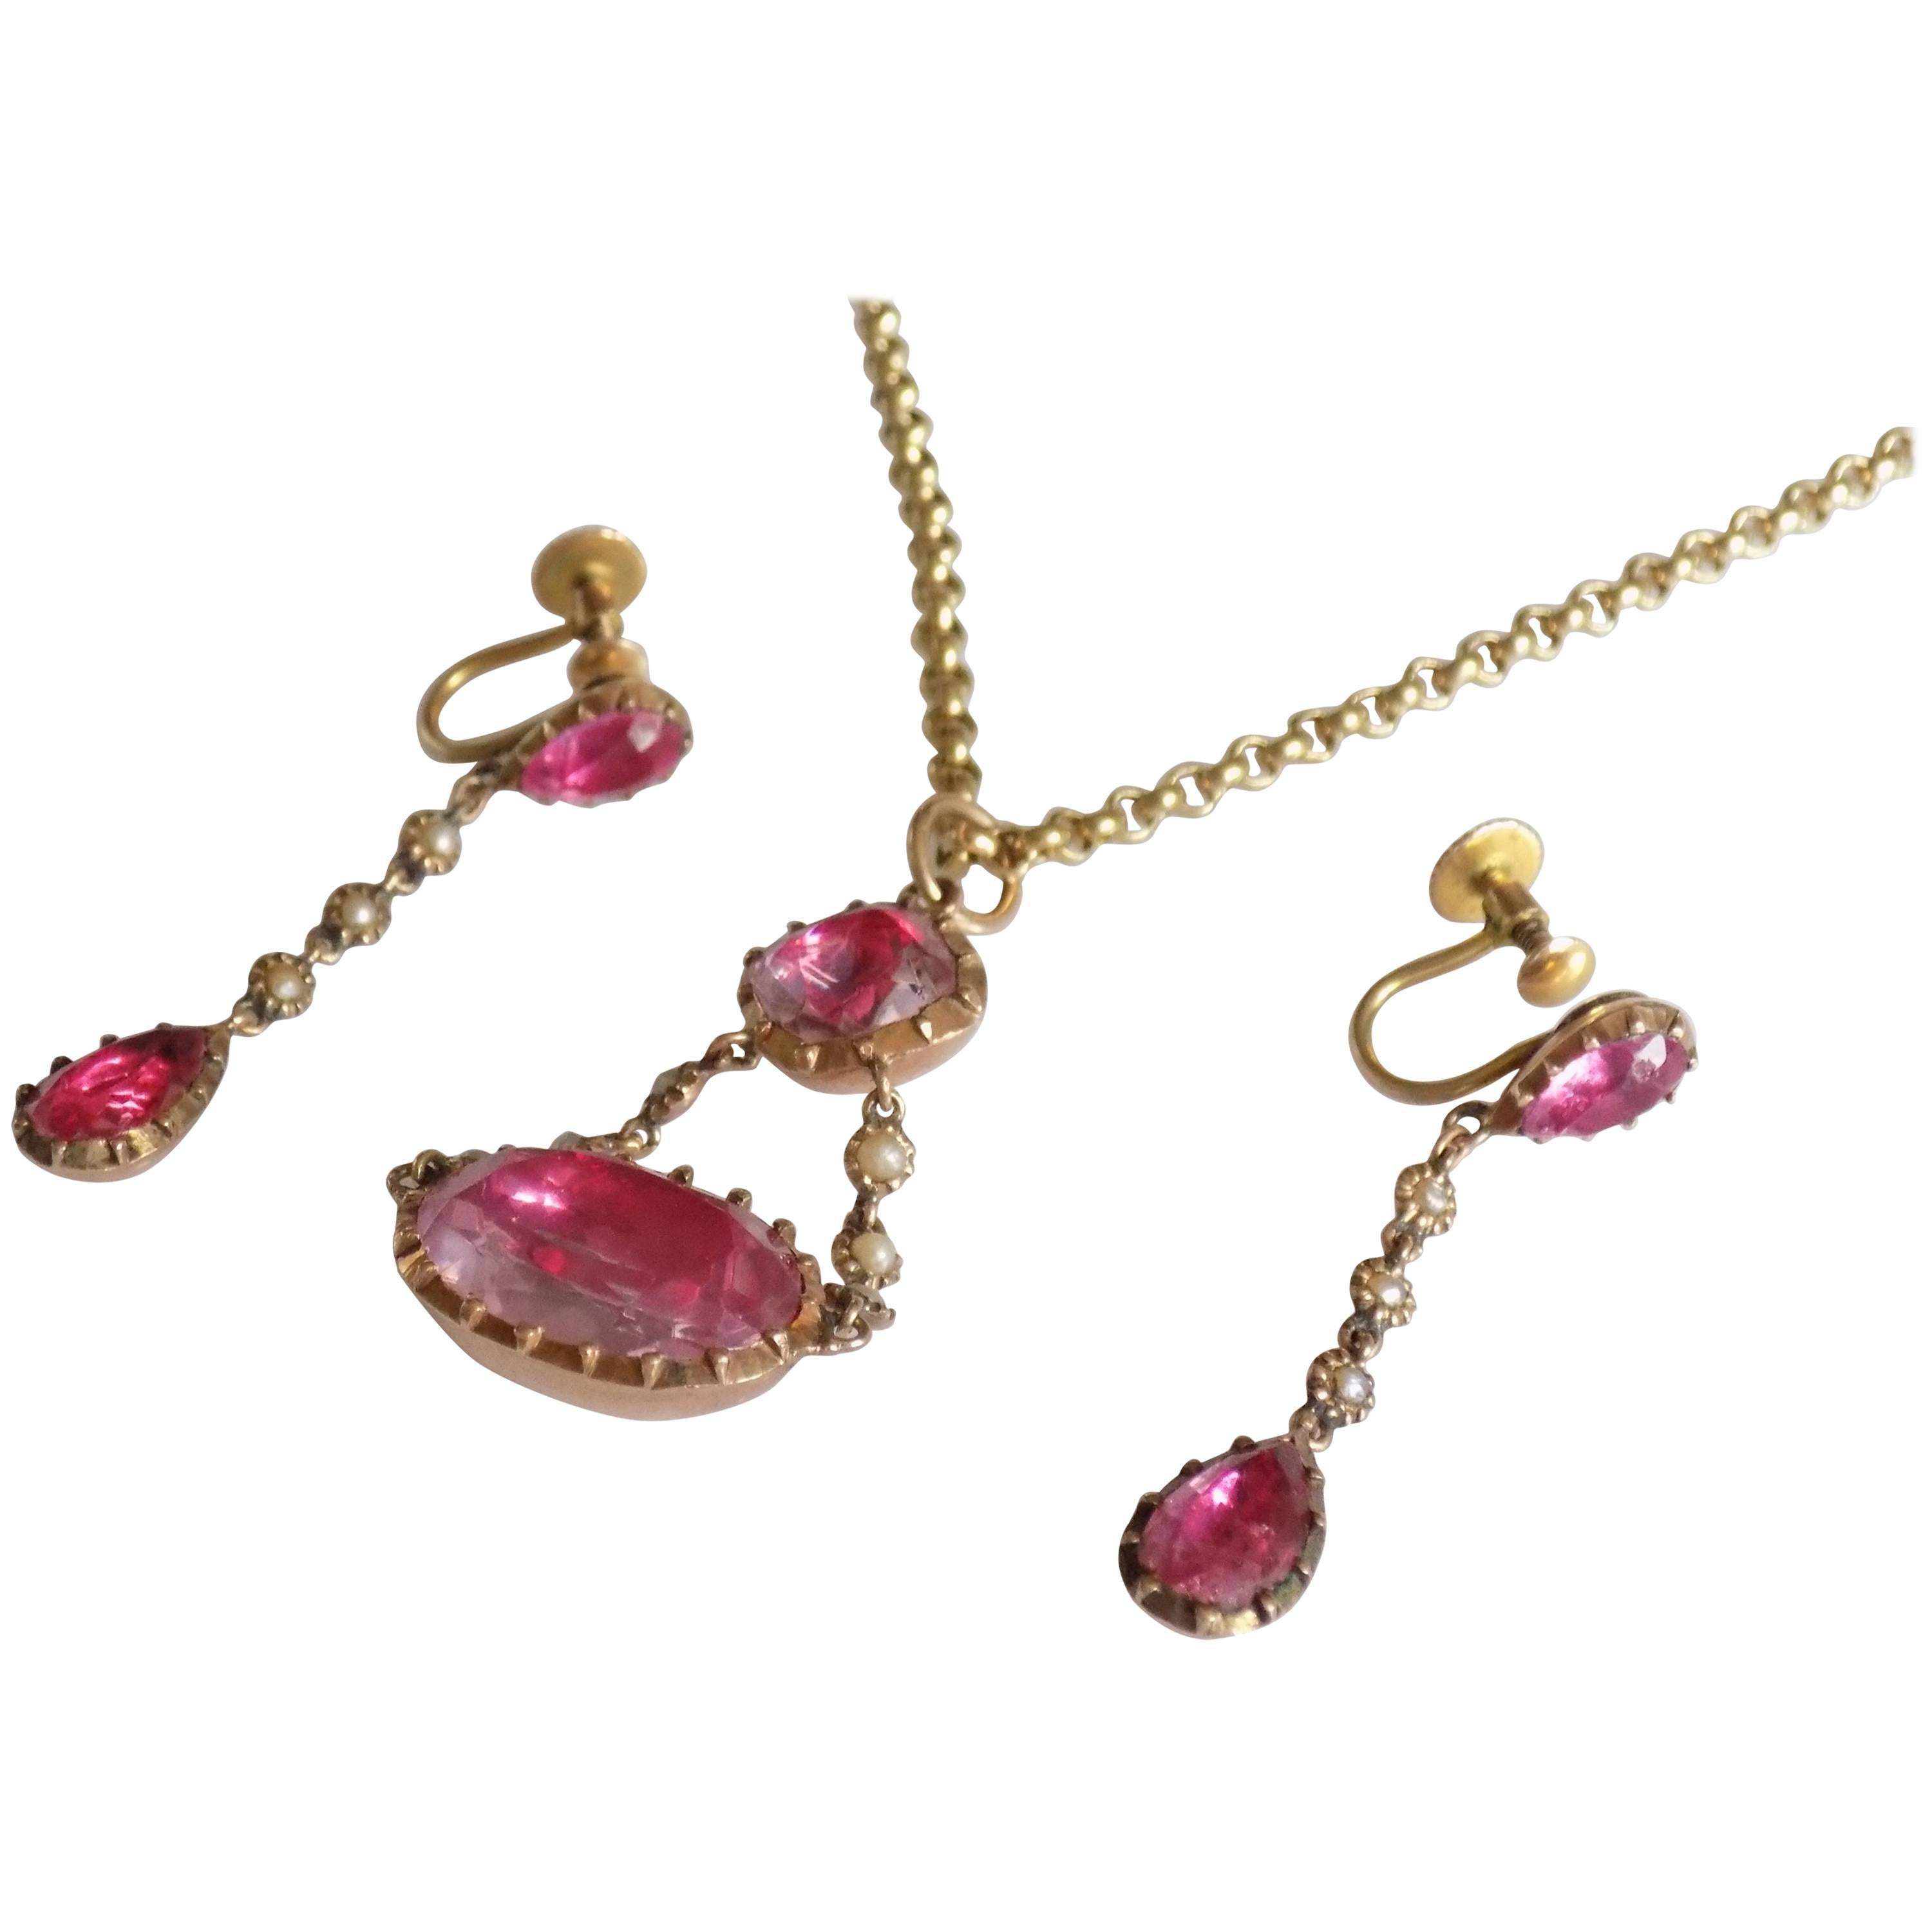 Rare Georgian Pink Topaz paste Pearl Gold Necklace Earrings Set